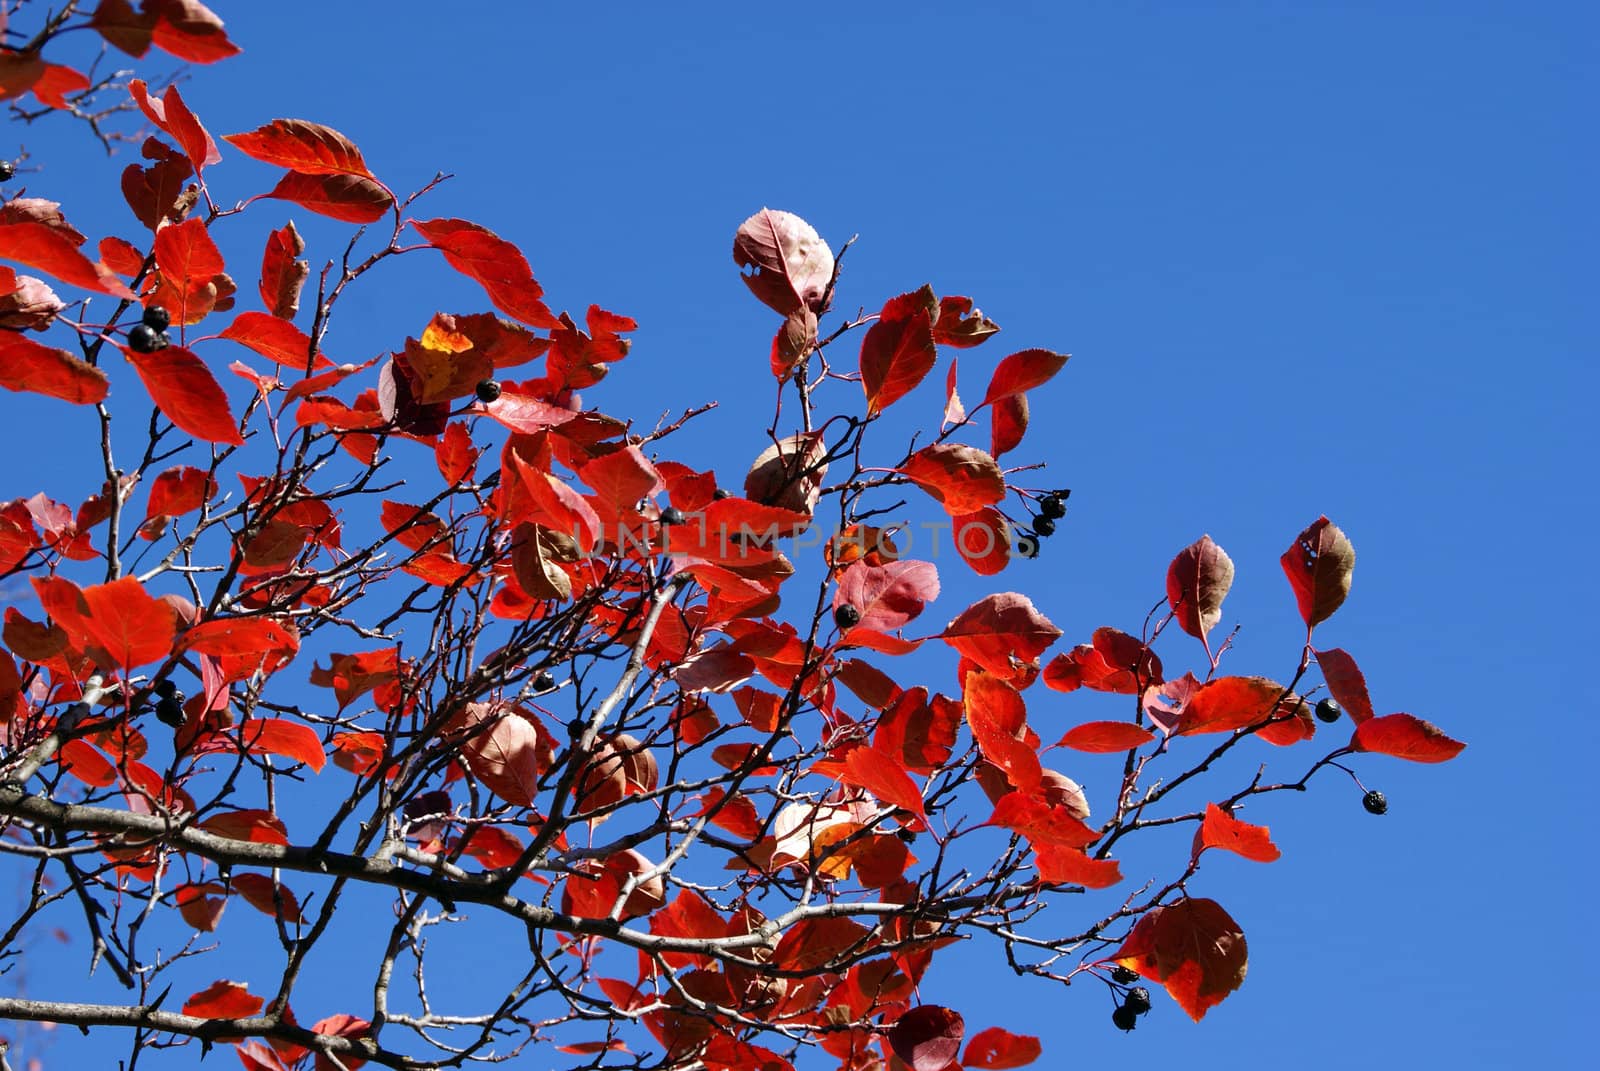 Red leaves and black berries of a small Aronia tree in autumn against the blue sky.